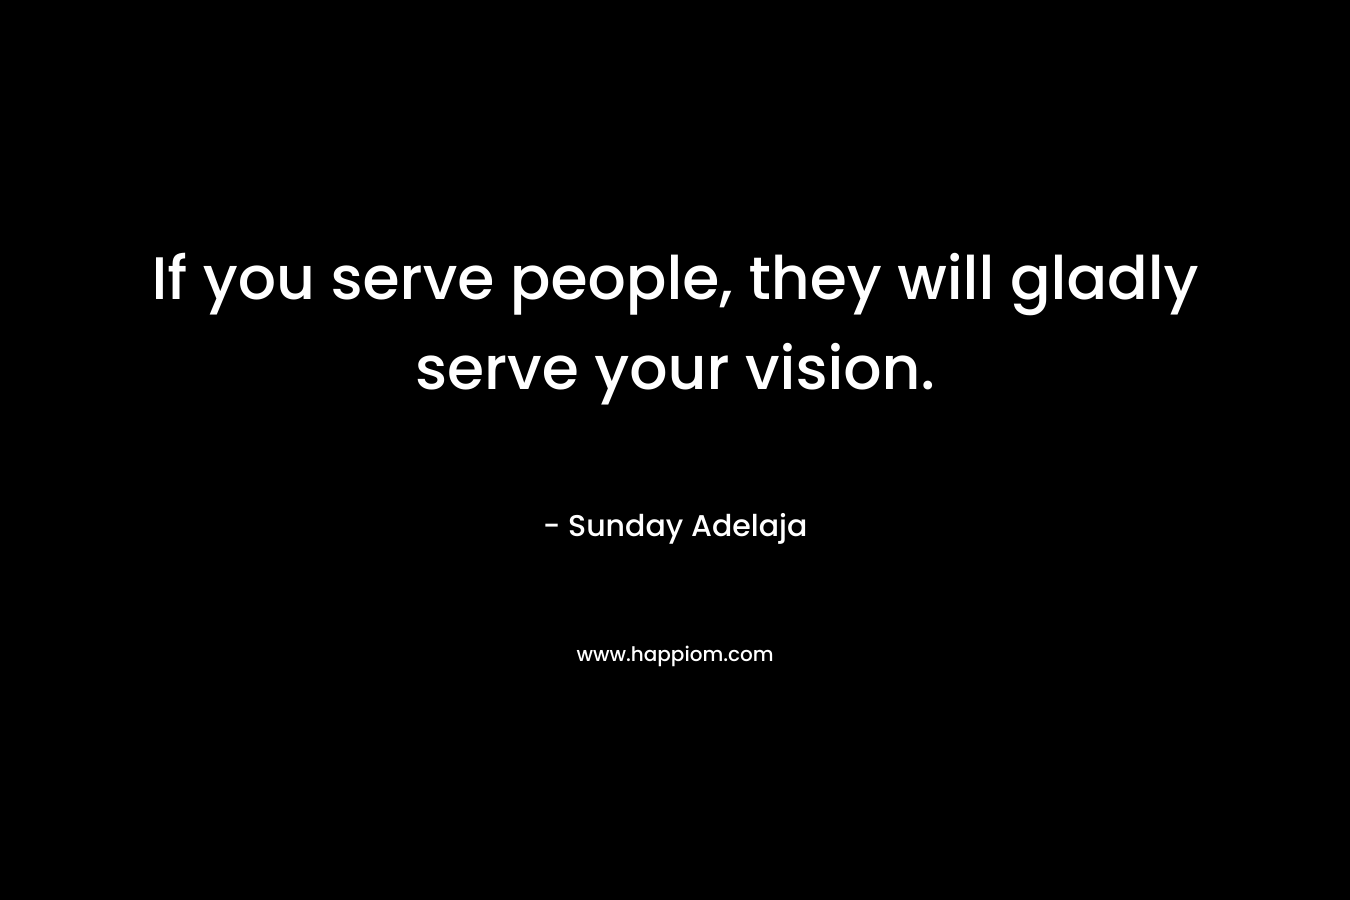 If you serve people, they will gladly serve your vision.